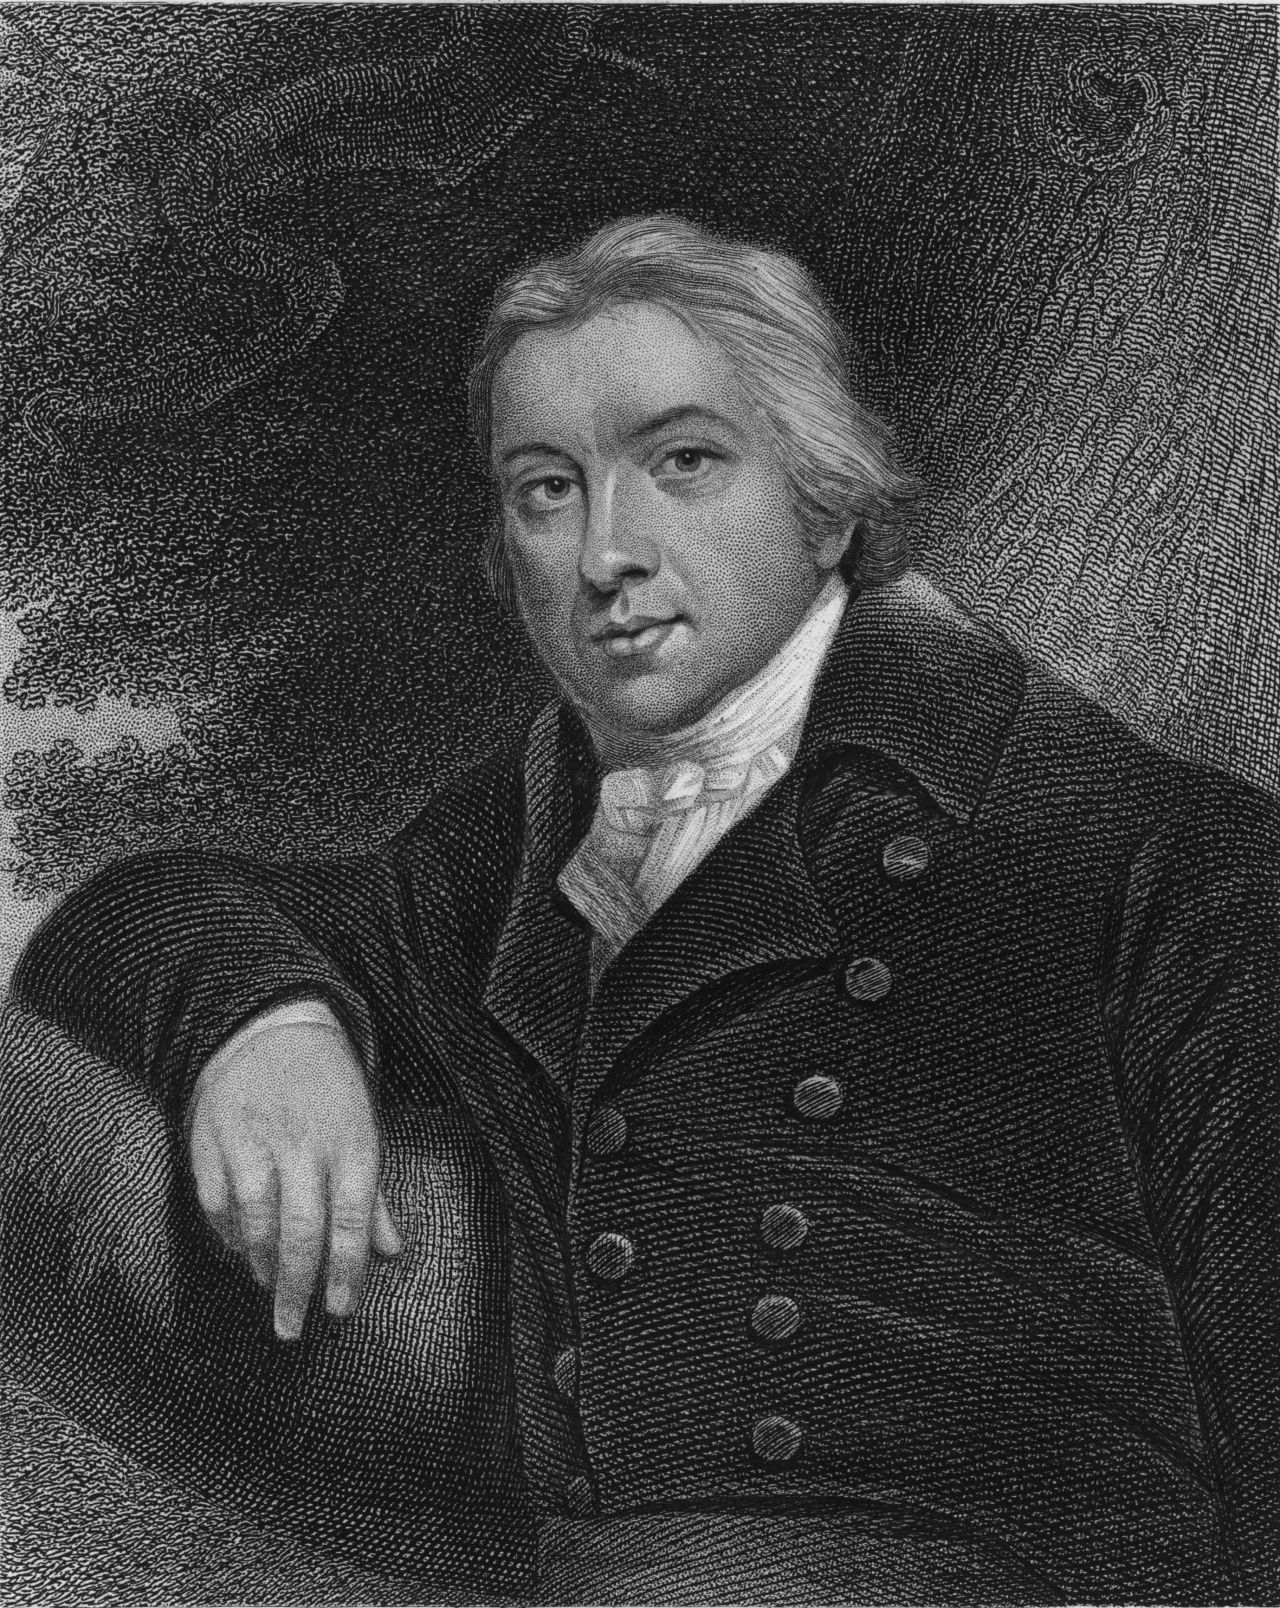 Dr. Edward Jenner is known as the <a href="http://www.ncbi.nlm.nih.gov/pmc/articles/PMC1200696/" target="_blank" target="_blank">founder of immunology</a>. He first attempted vaccination against smallpox in 1796 by taking cowpox lesions from a dairymaid's hands and inoculating an 8-year-old boy. On May 8, 1980, the World Health Assembly announced that smallpox had been eradicated across the globe. Samples of the virus are still kept in government laboratories for research as some fear smallpox could one day be <a href="http://www.yalemedlaw.com/2010/02/smallpox-bioterrorism-how-big-a-threat/" target="_blank" target="_blank">used as a bioterrorism agent</a>. 